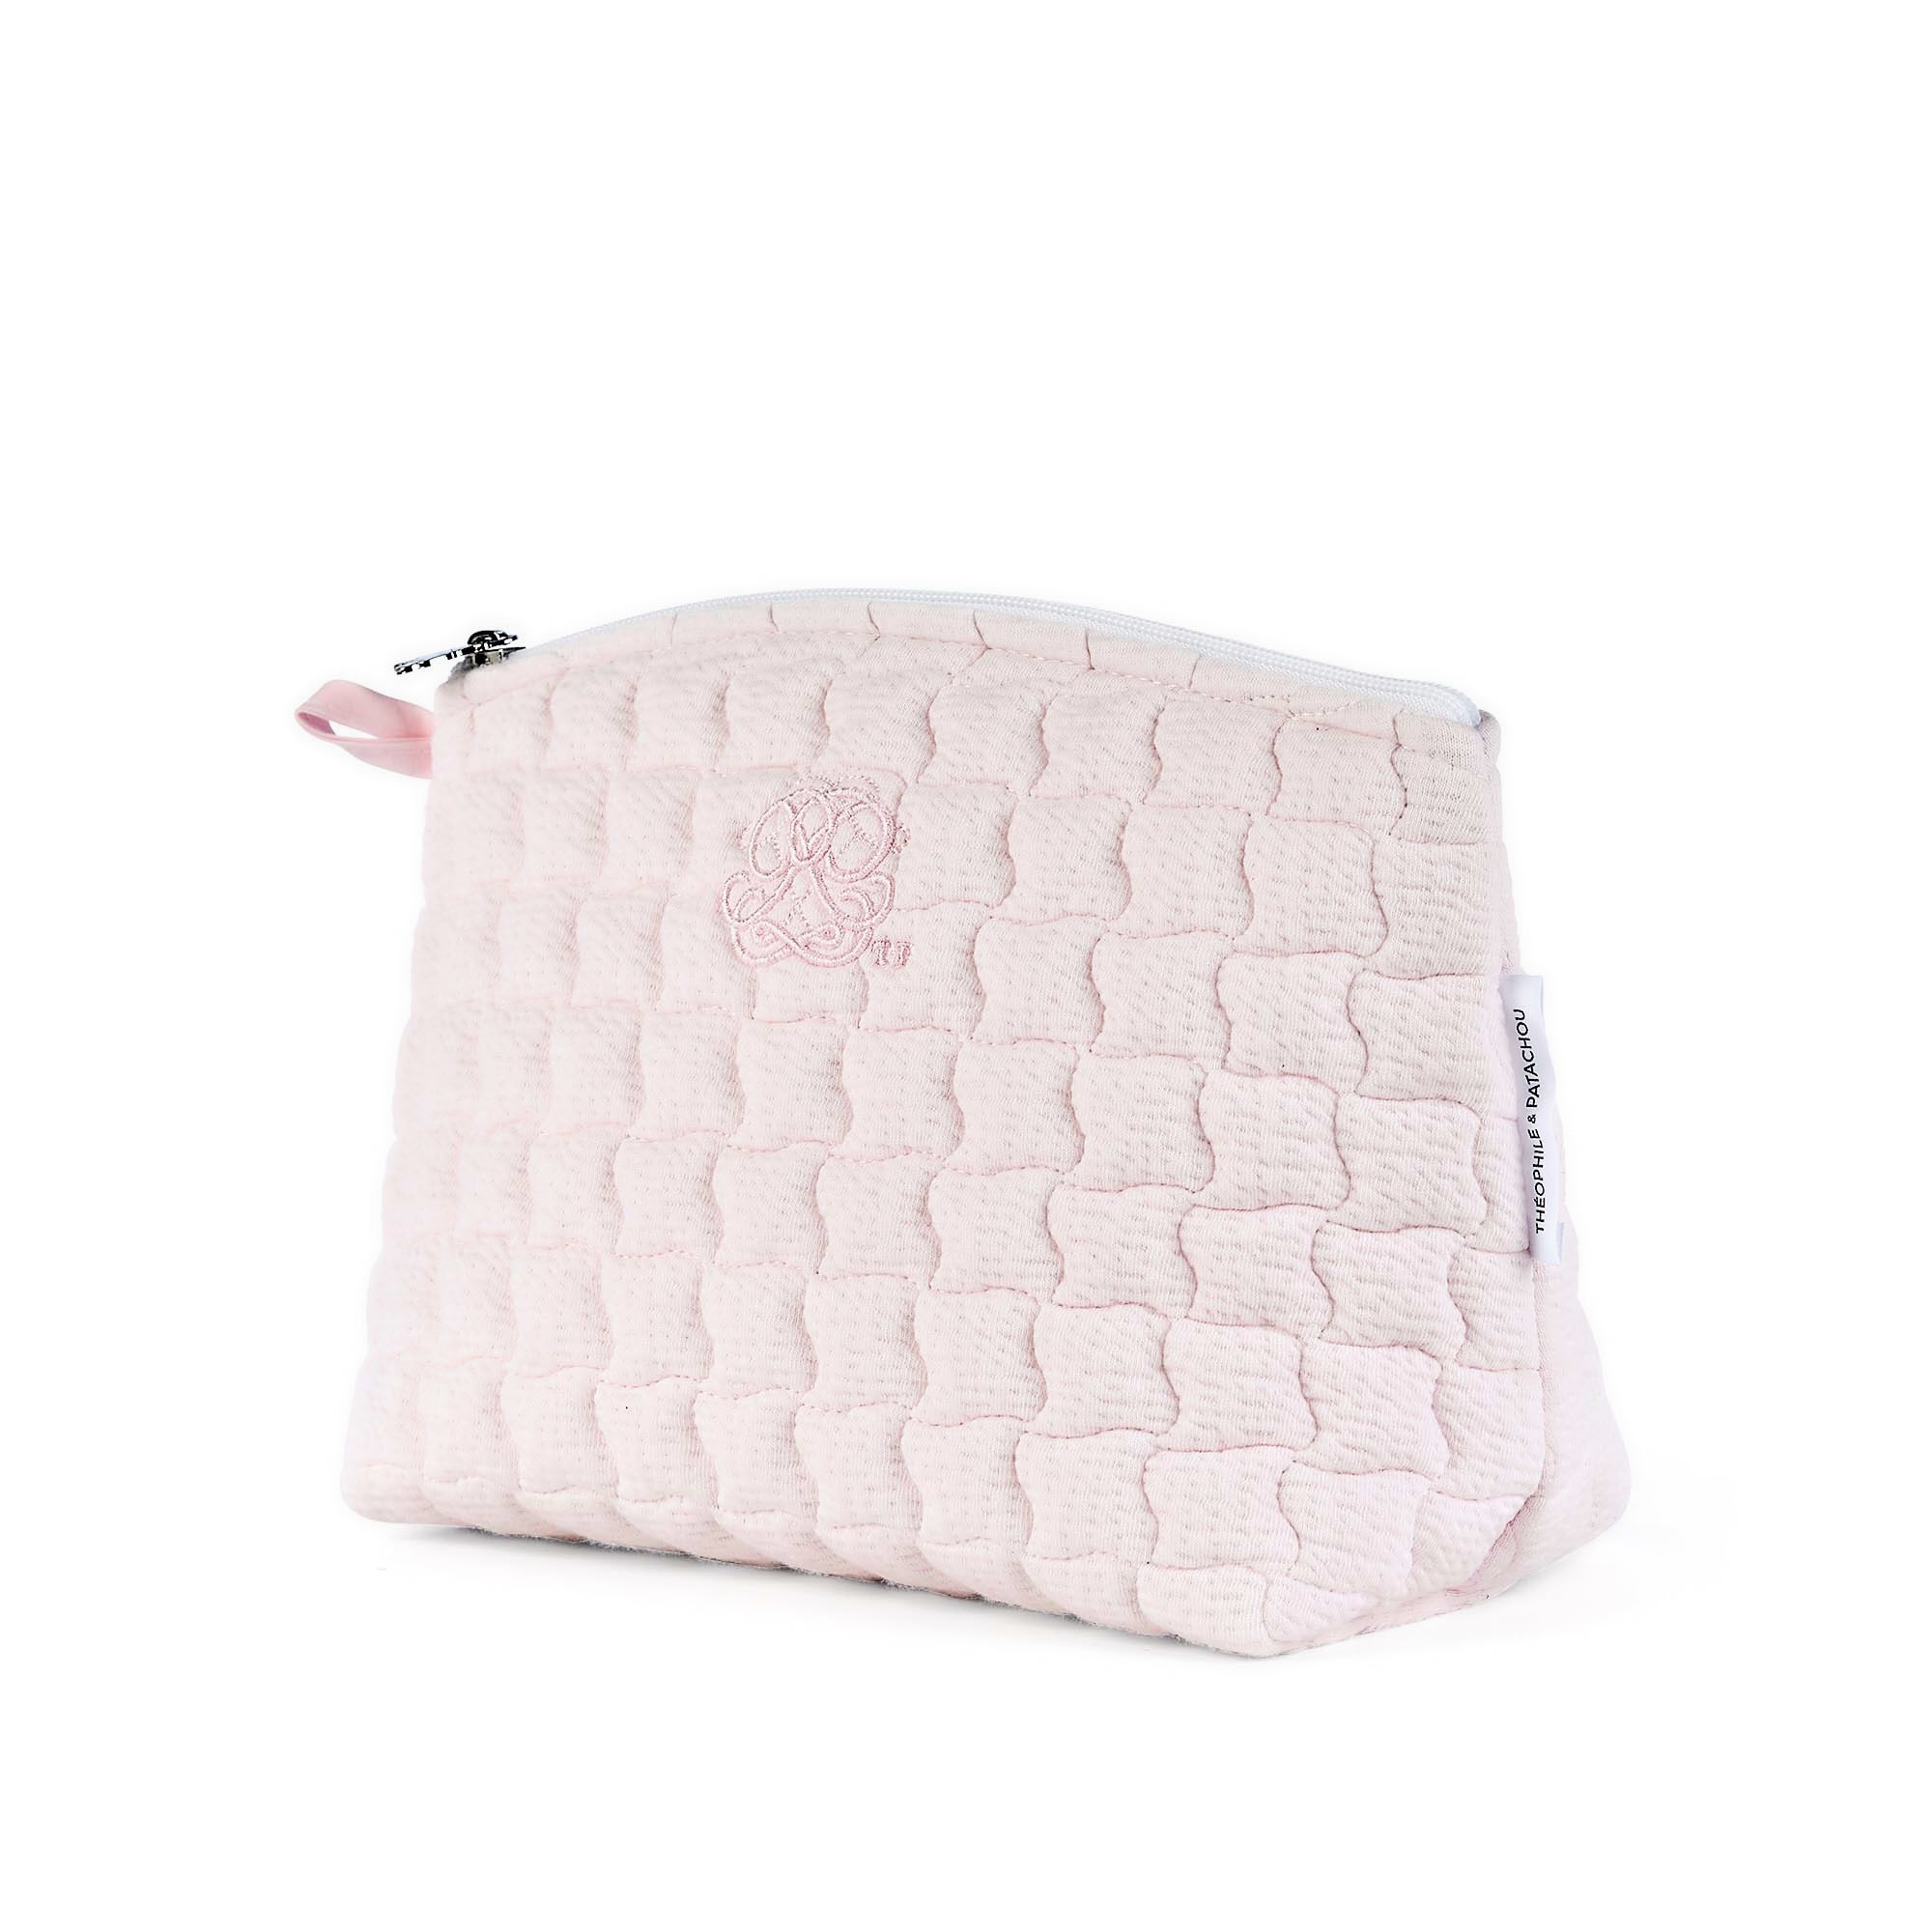 Theophile & Patachou Toiletry Bag - Cotton Pink